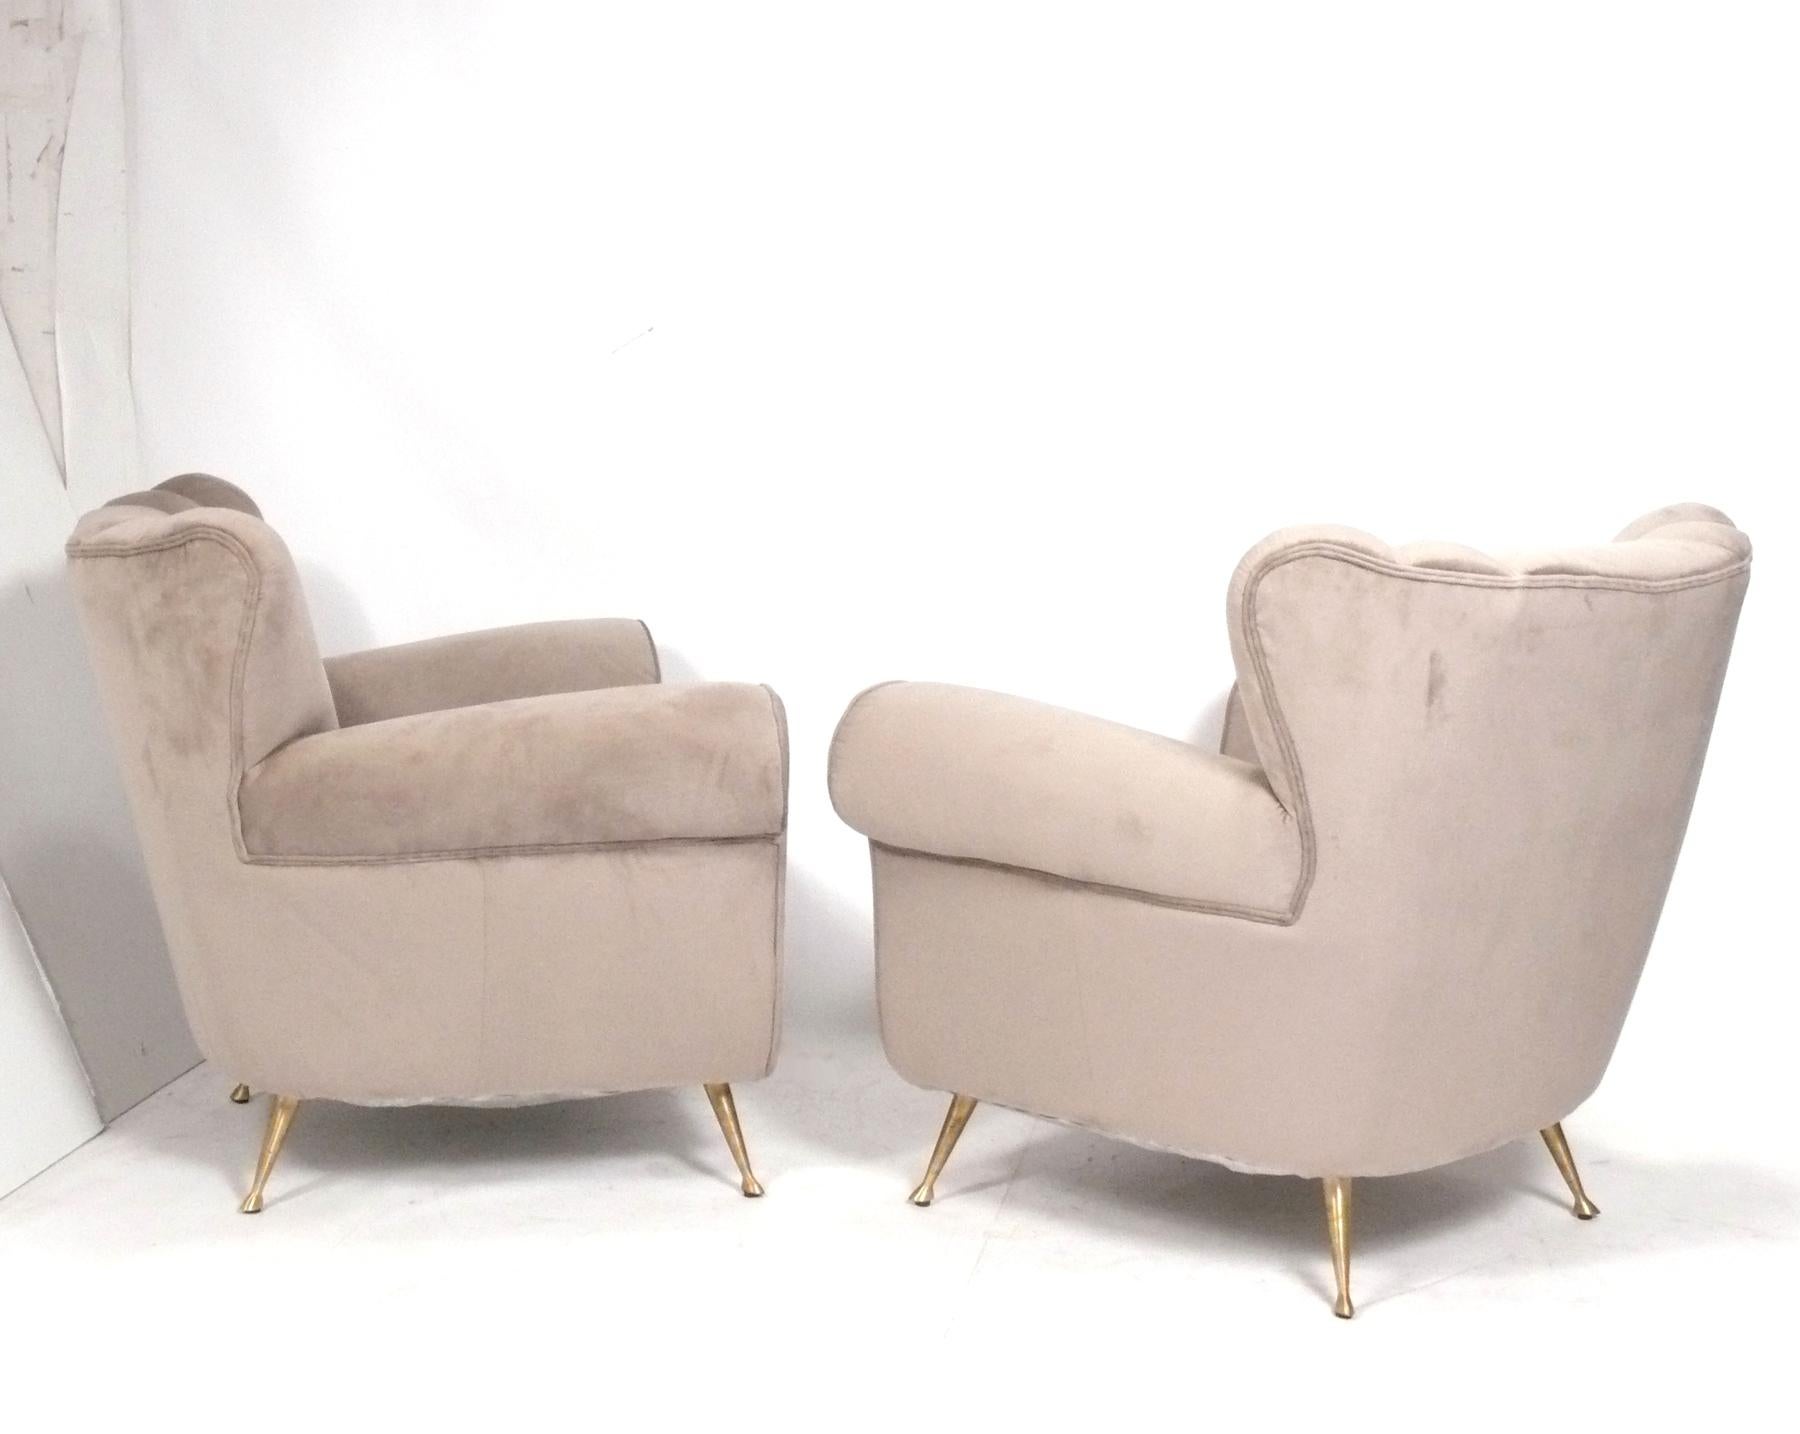 Pair of Italian Lounge Chairs Mid Century Style  In Good Condition For Sale In Atlanta, GA